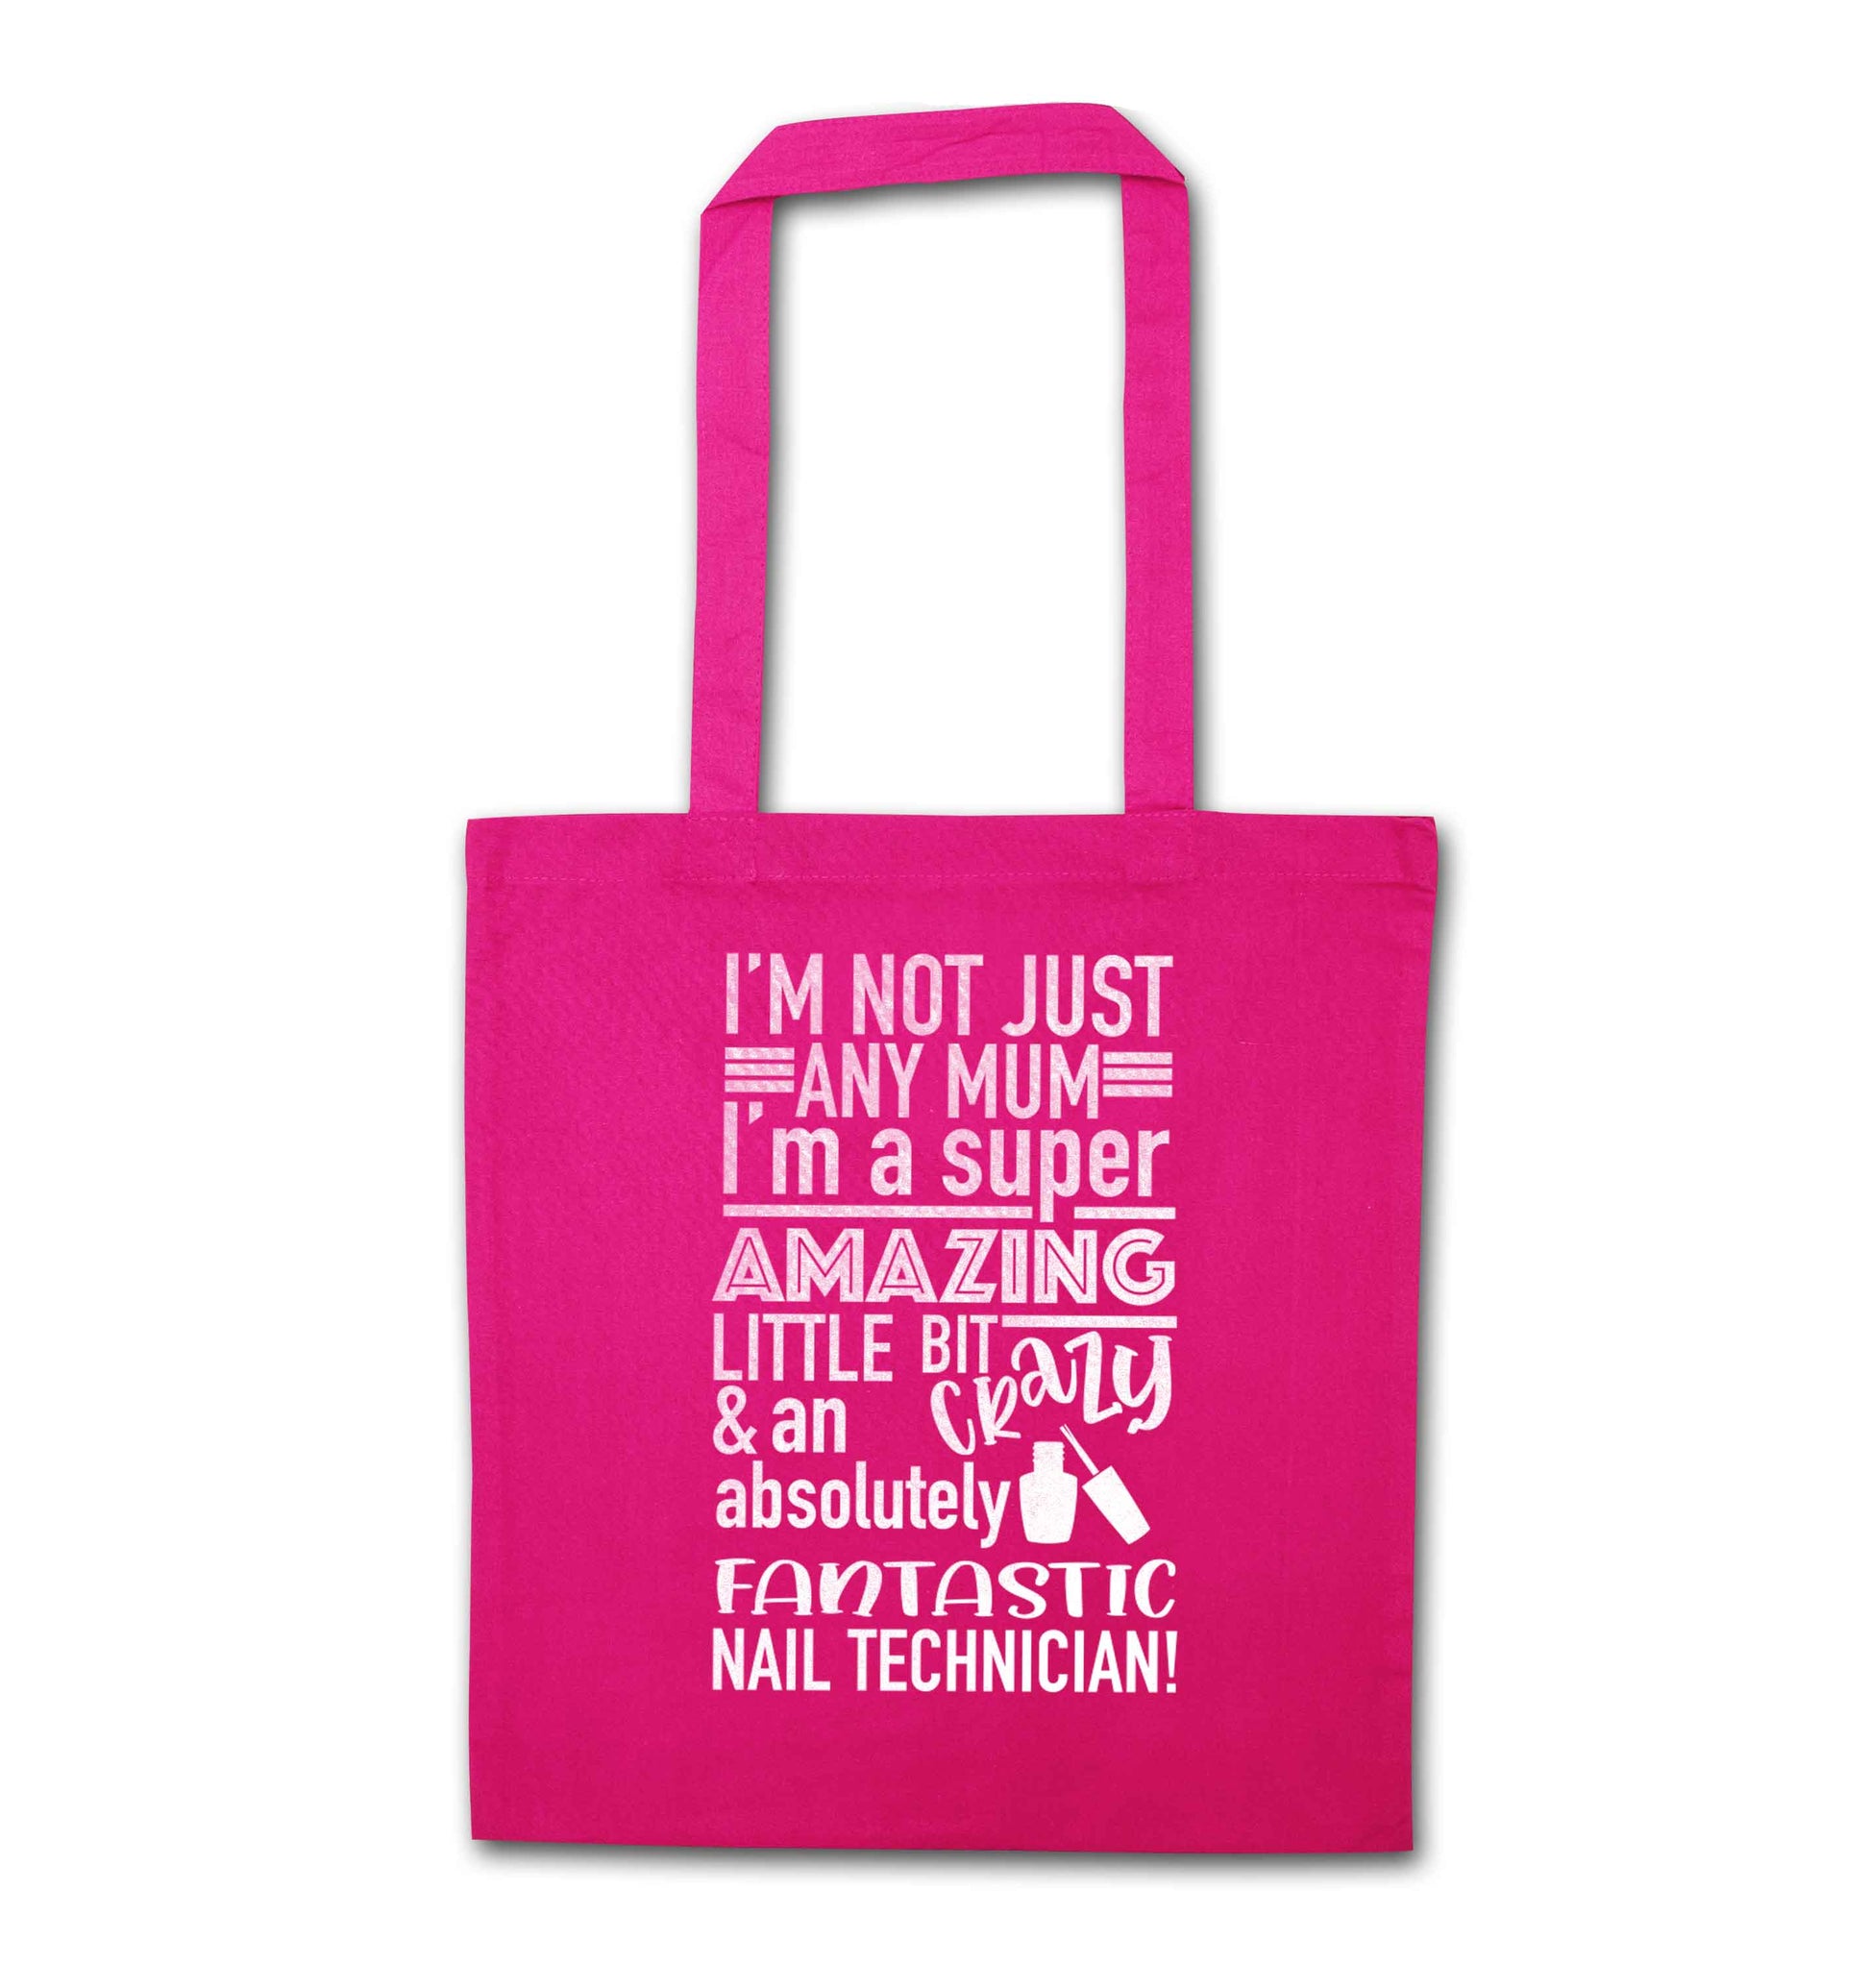 I'm not just any mum I'm a super amazing little bit crazy and an absolutely fantastic nail technician! pink tote bag